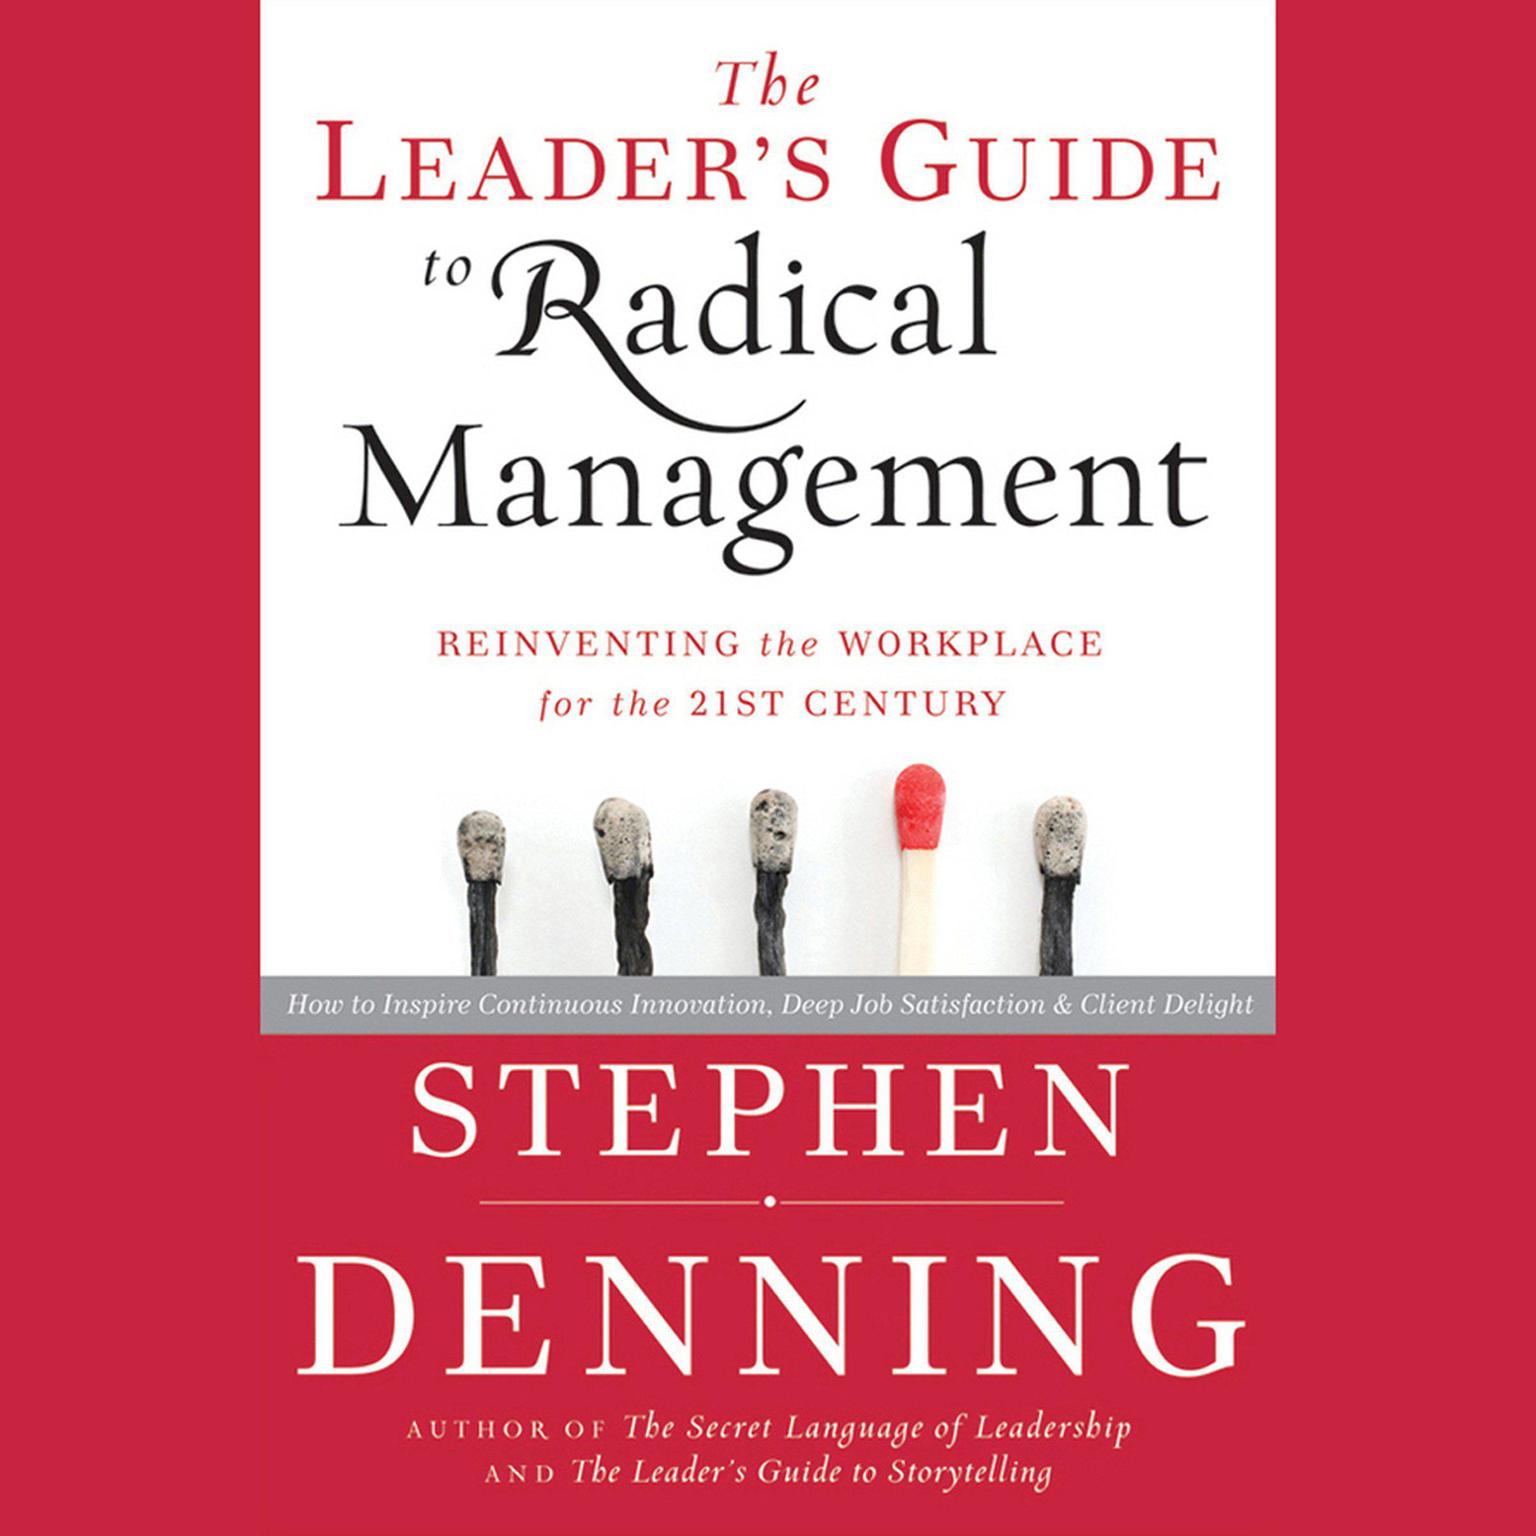 The Leaders Guide to Radical Management: Reinventing the Workplace for the 21st Century Audiobook, by Stephen Denning